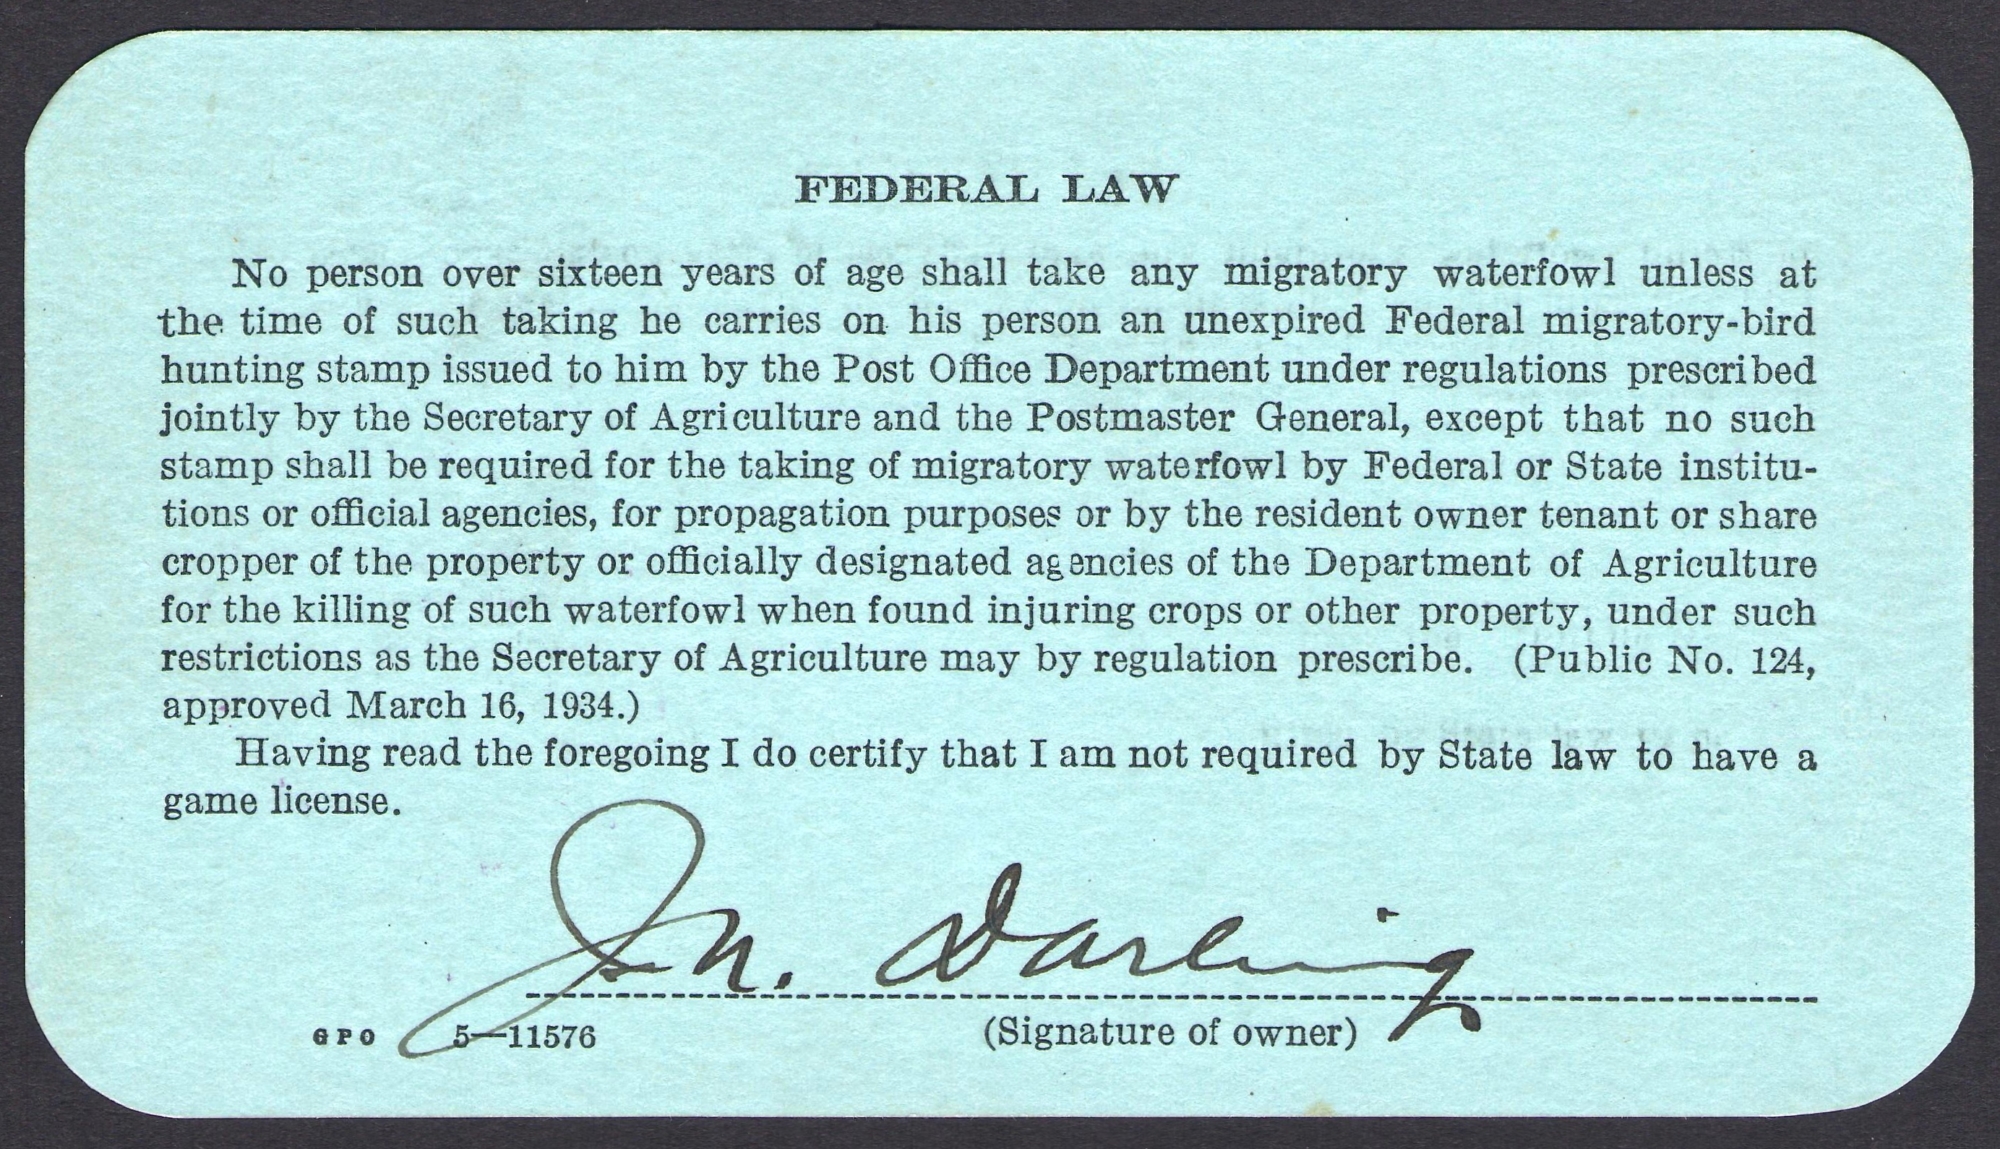 RW1 on Form 3333, cancelled August 22, 1934 – reverse showing Darling's signature